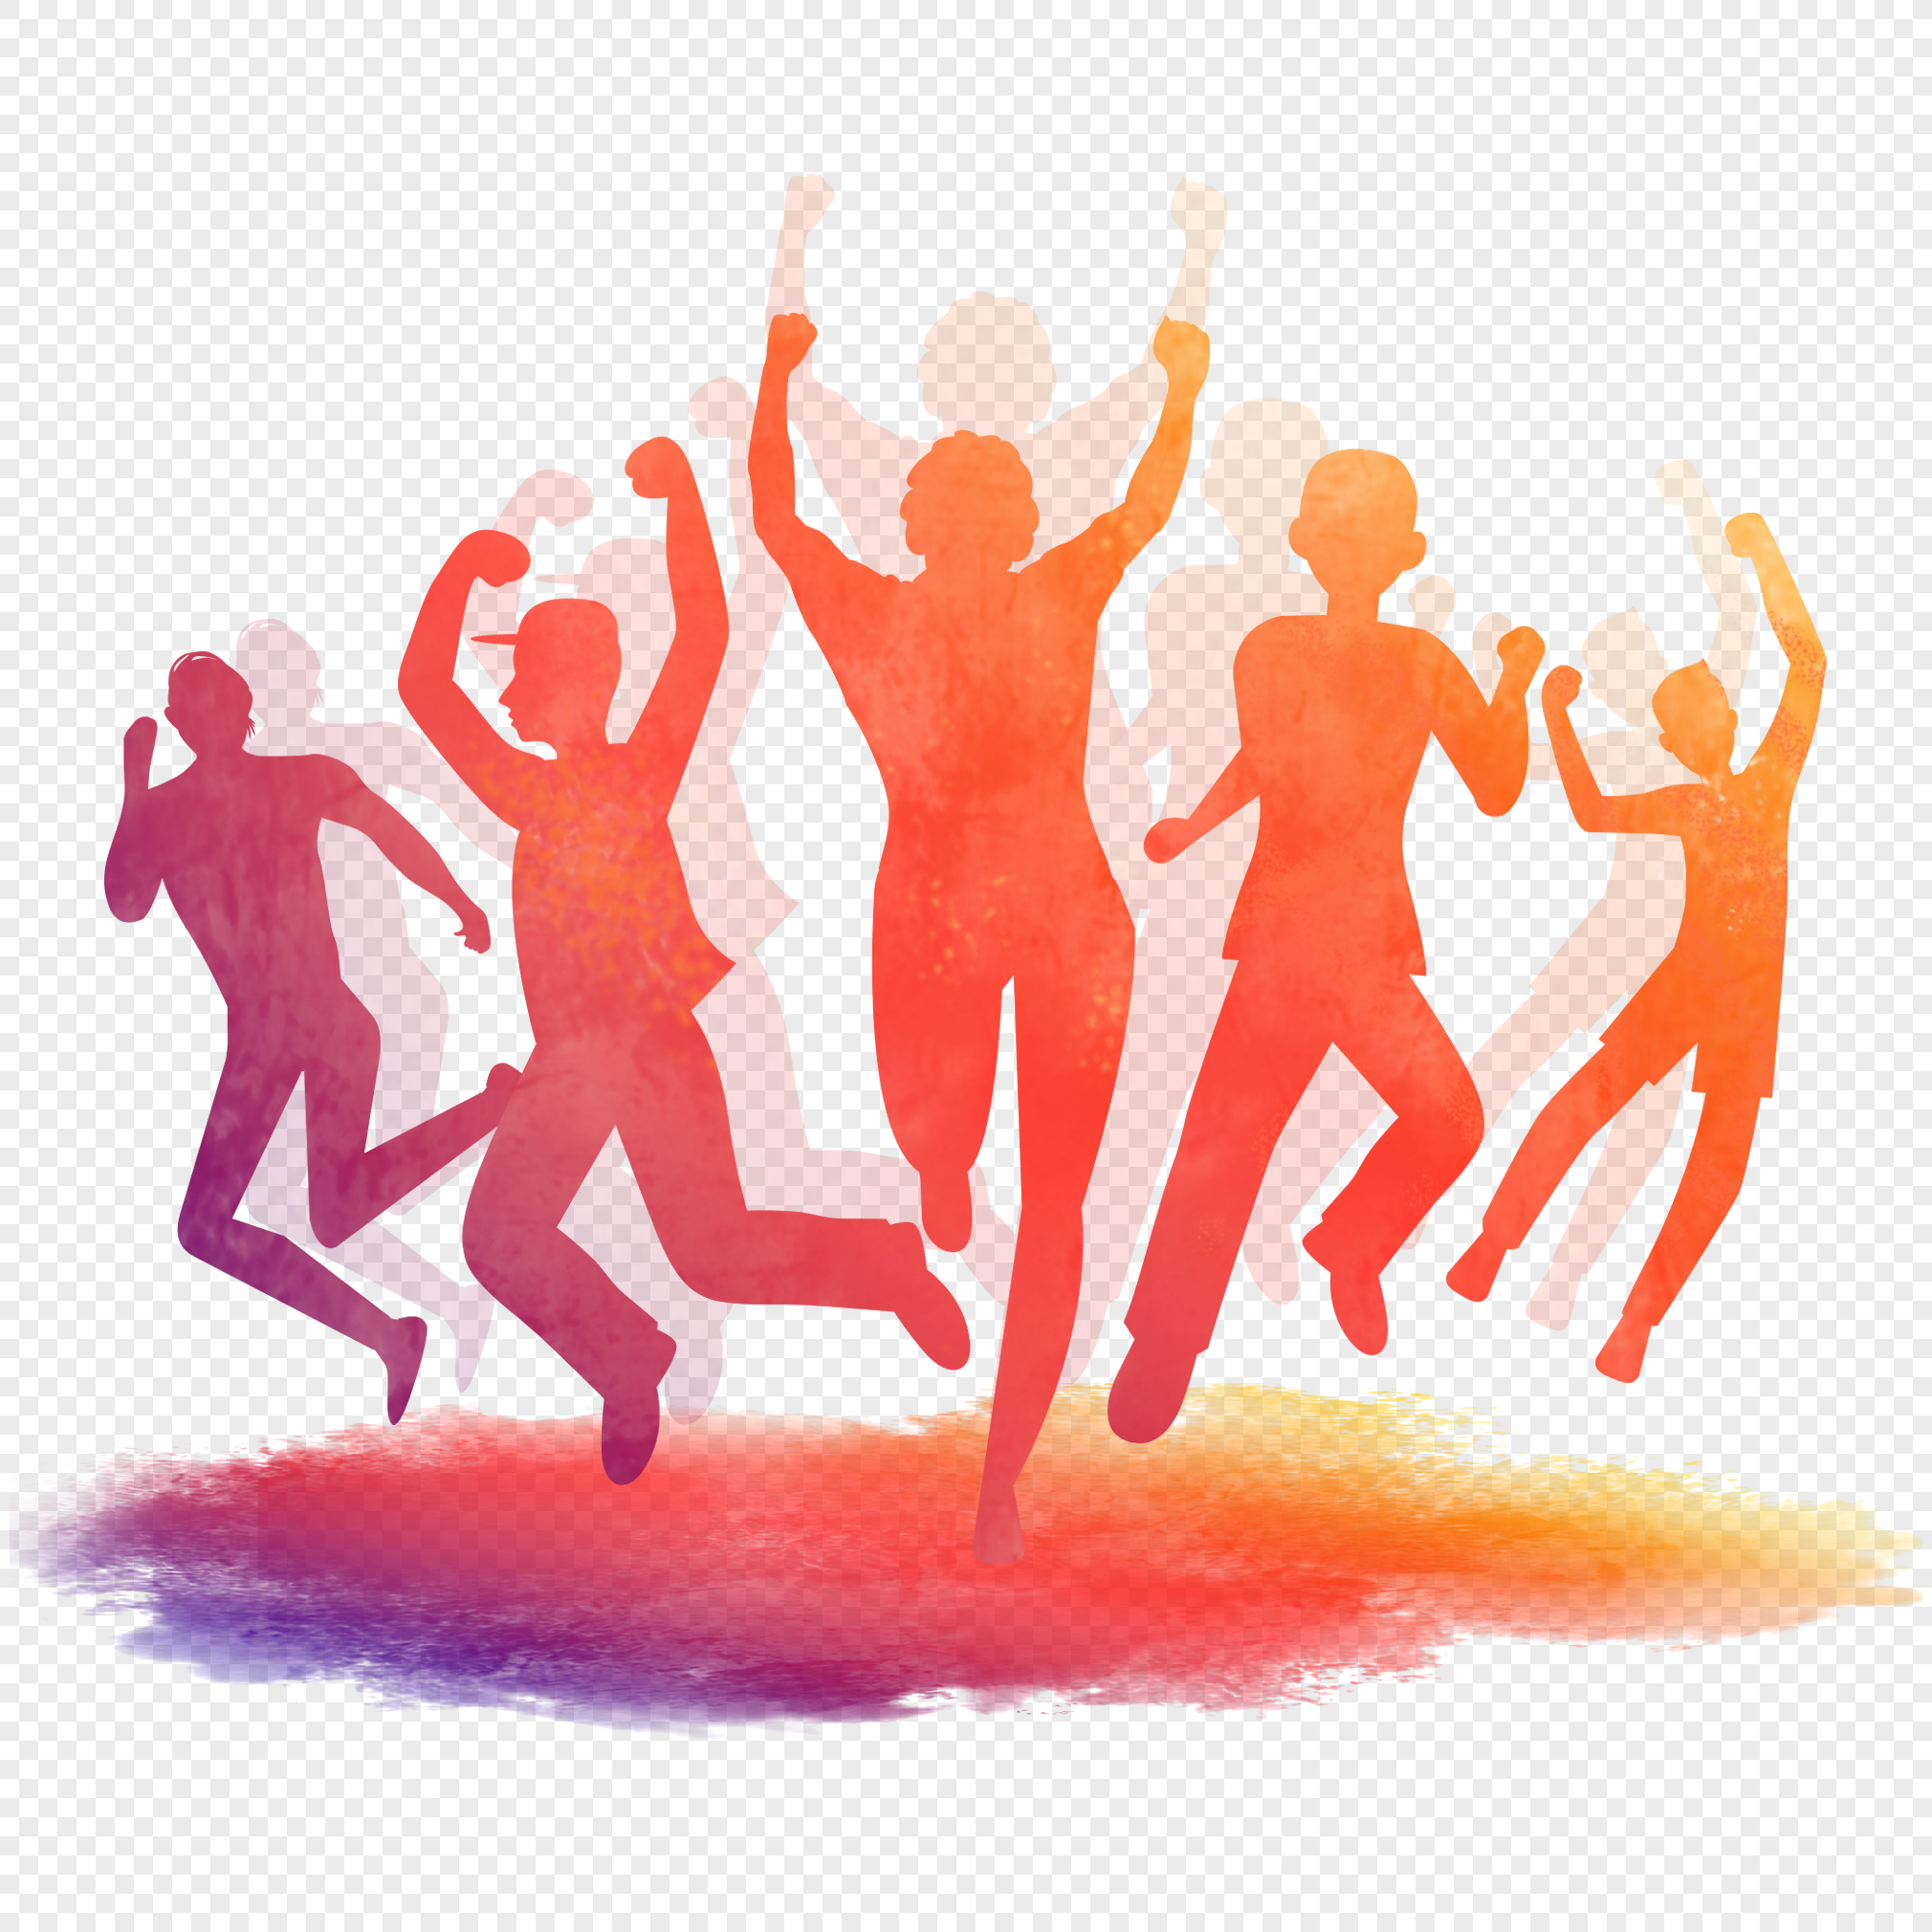 Youth Festival Colorful Gradient Character Image Silhouette Elem ...